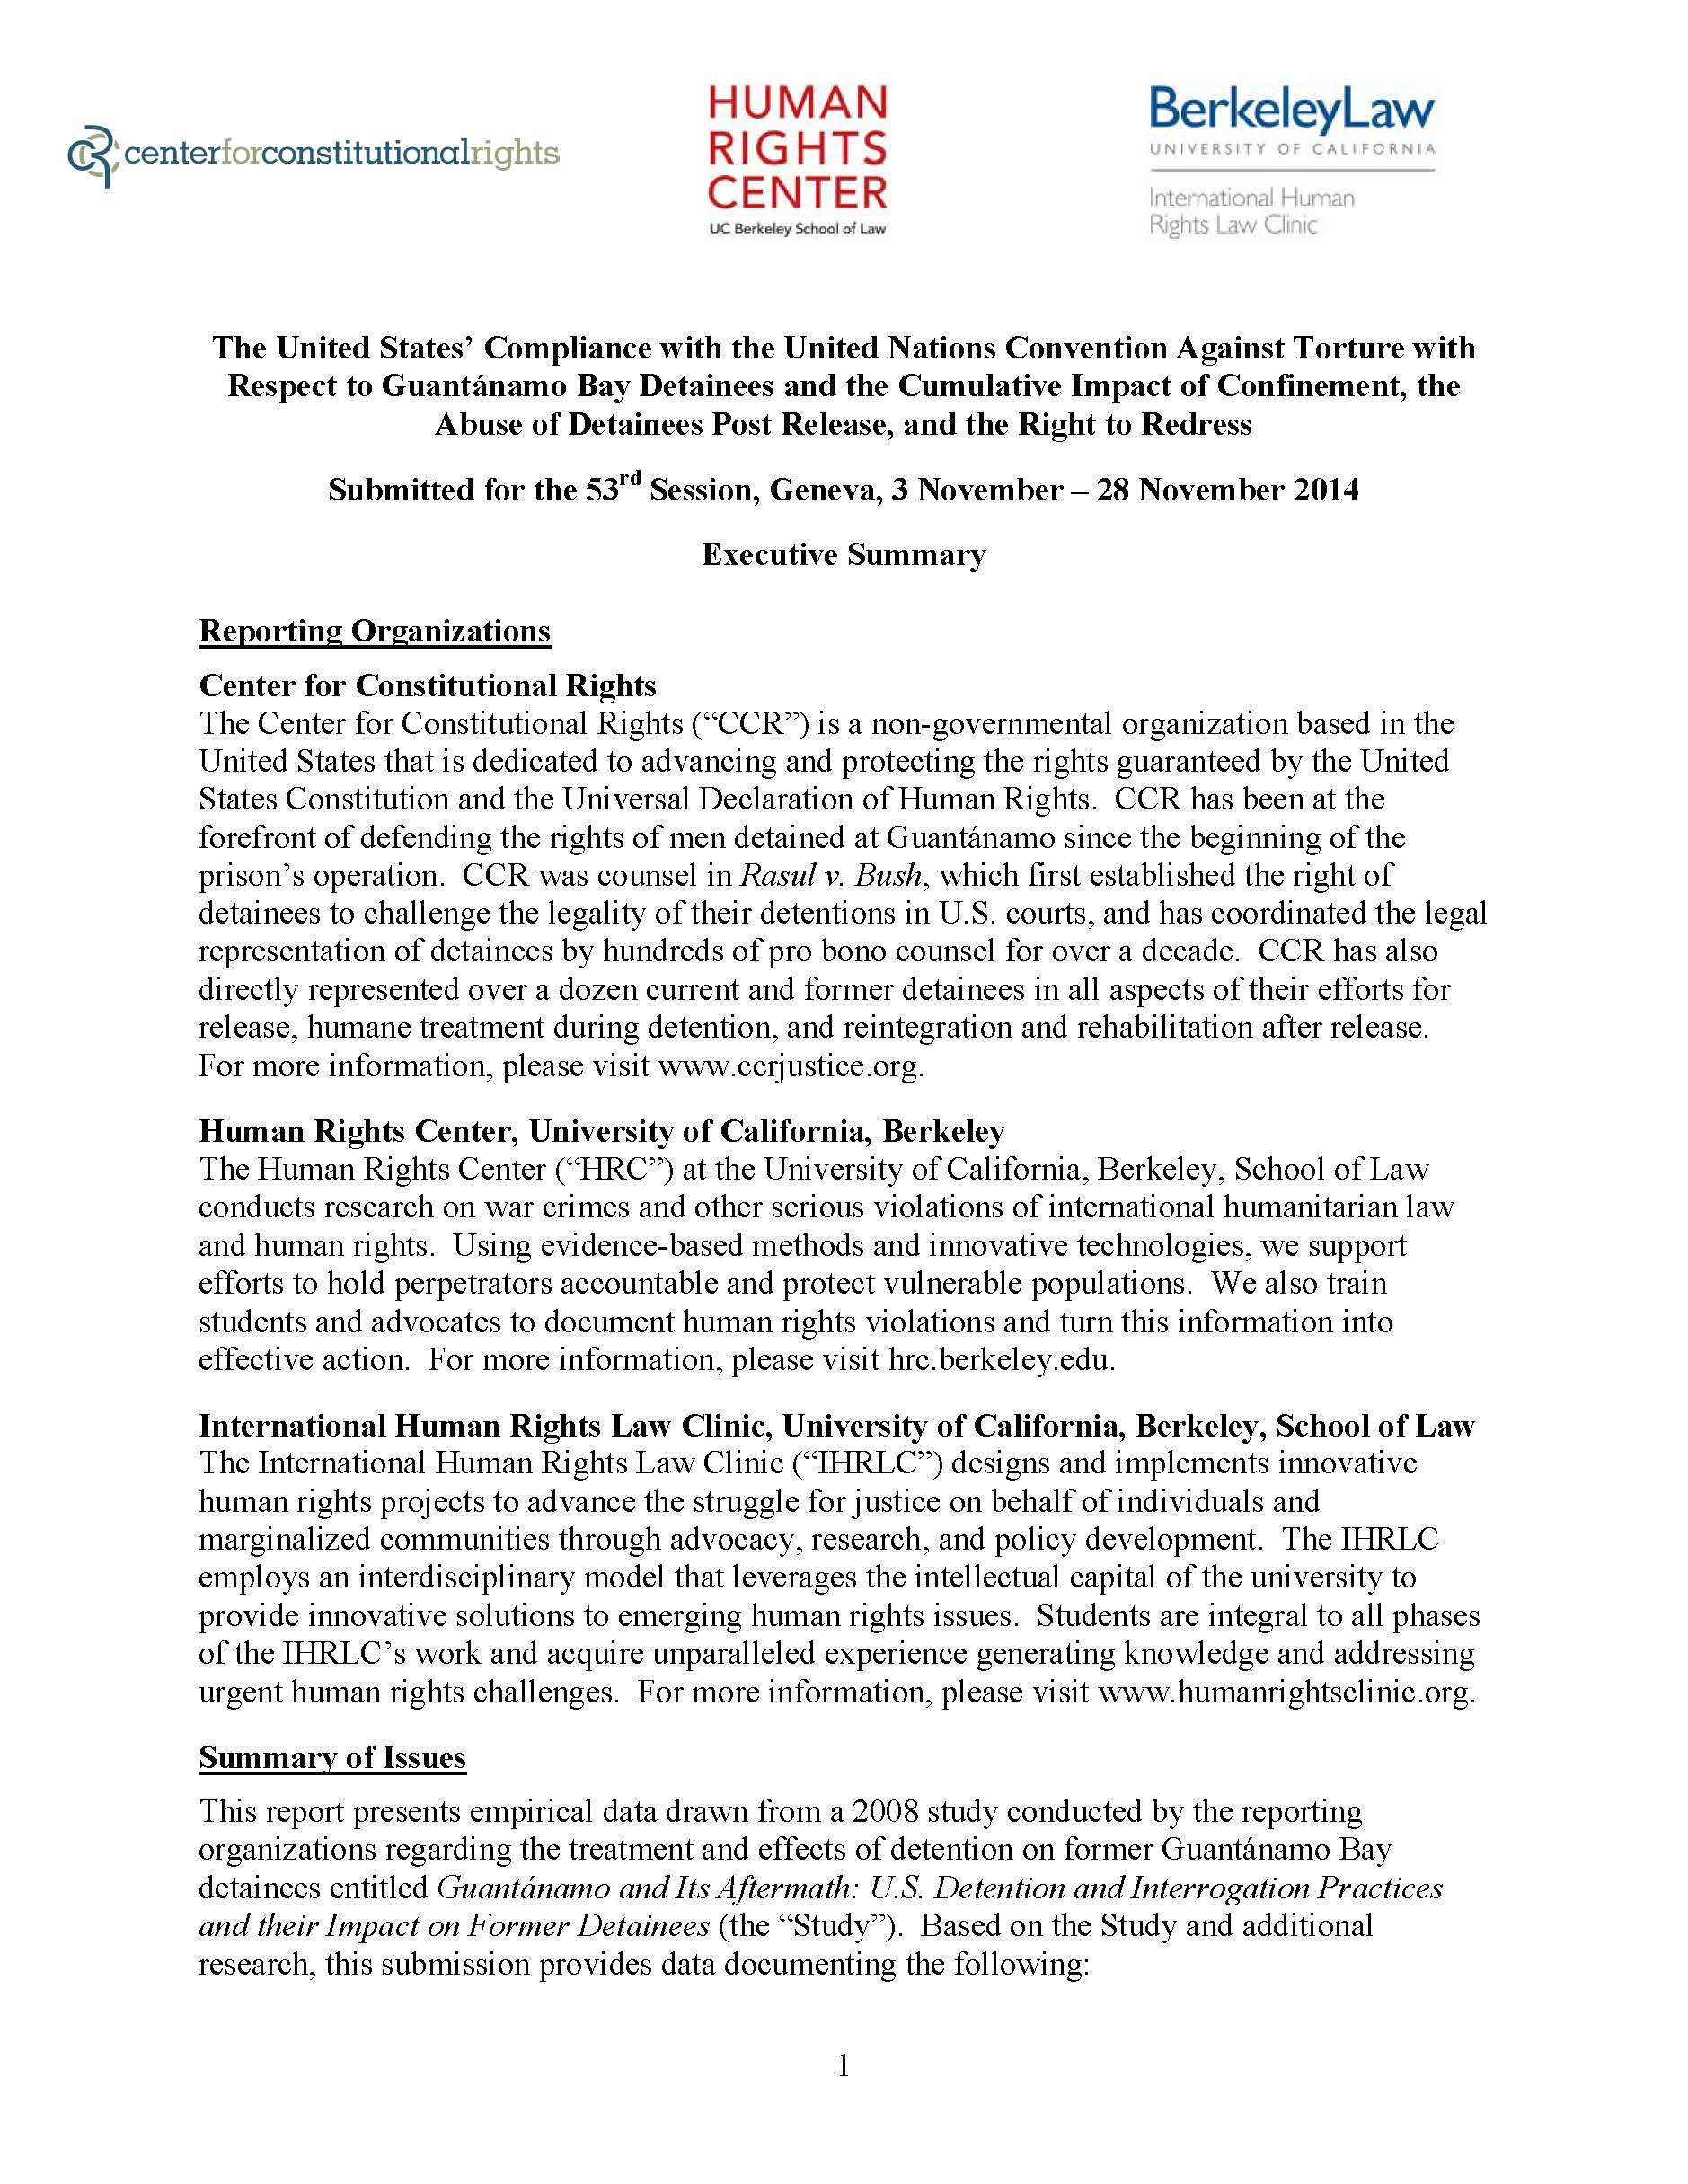 The United States’ Compliance with the United Nations Convention Against Torture with Respect to Guantánamo Bay Detainees and the Cumulative Impact of Confinement, the Abuse of Detainees Post Release, and the Right to Redress